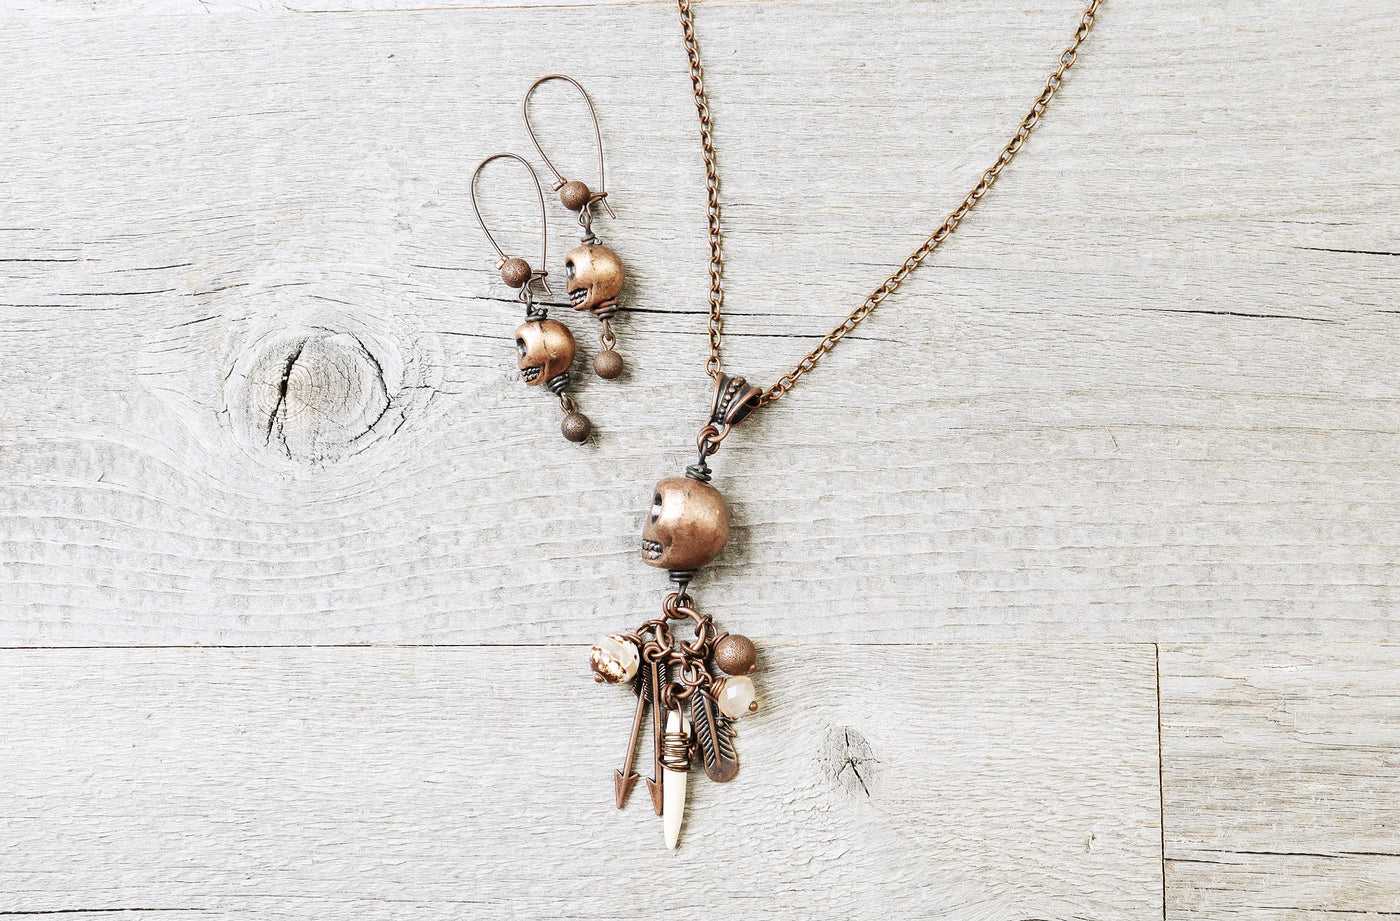 Skull Boho Necklace, Native American Indian Tribal Tooth Feather Cranium Antique Metal Pendant Gypsy Hippie Bohemian Earring Jewelry Set